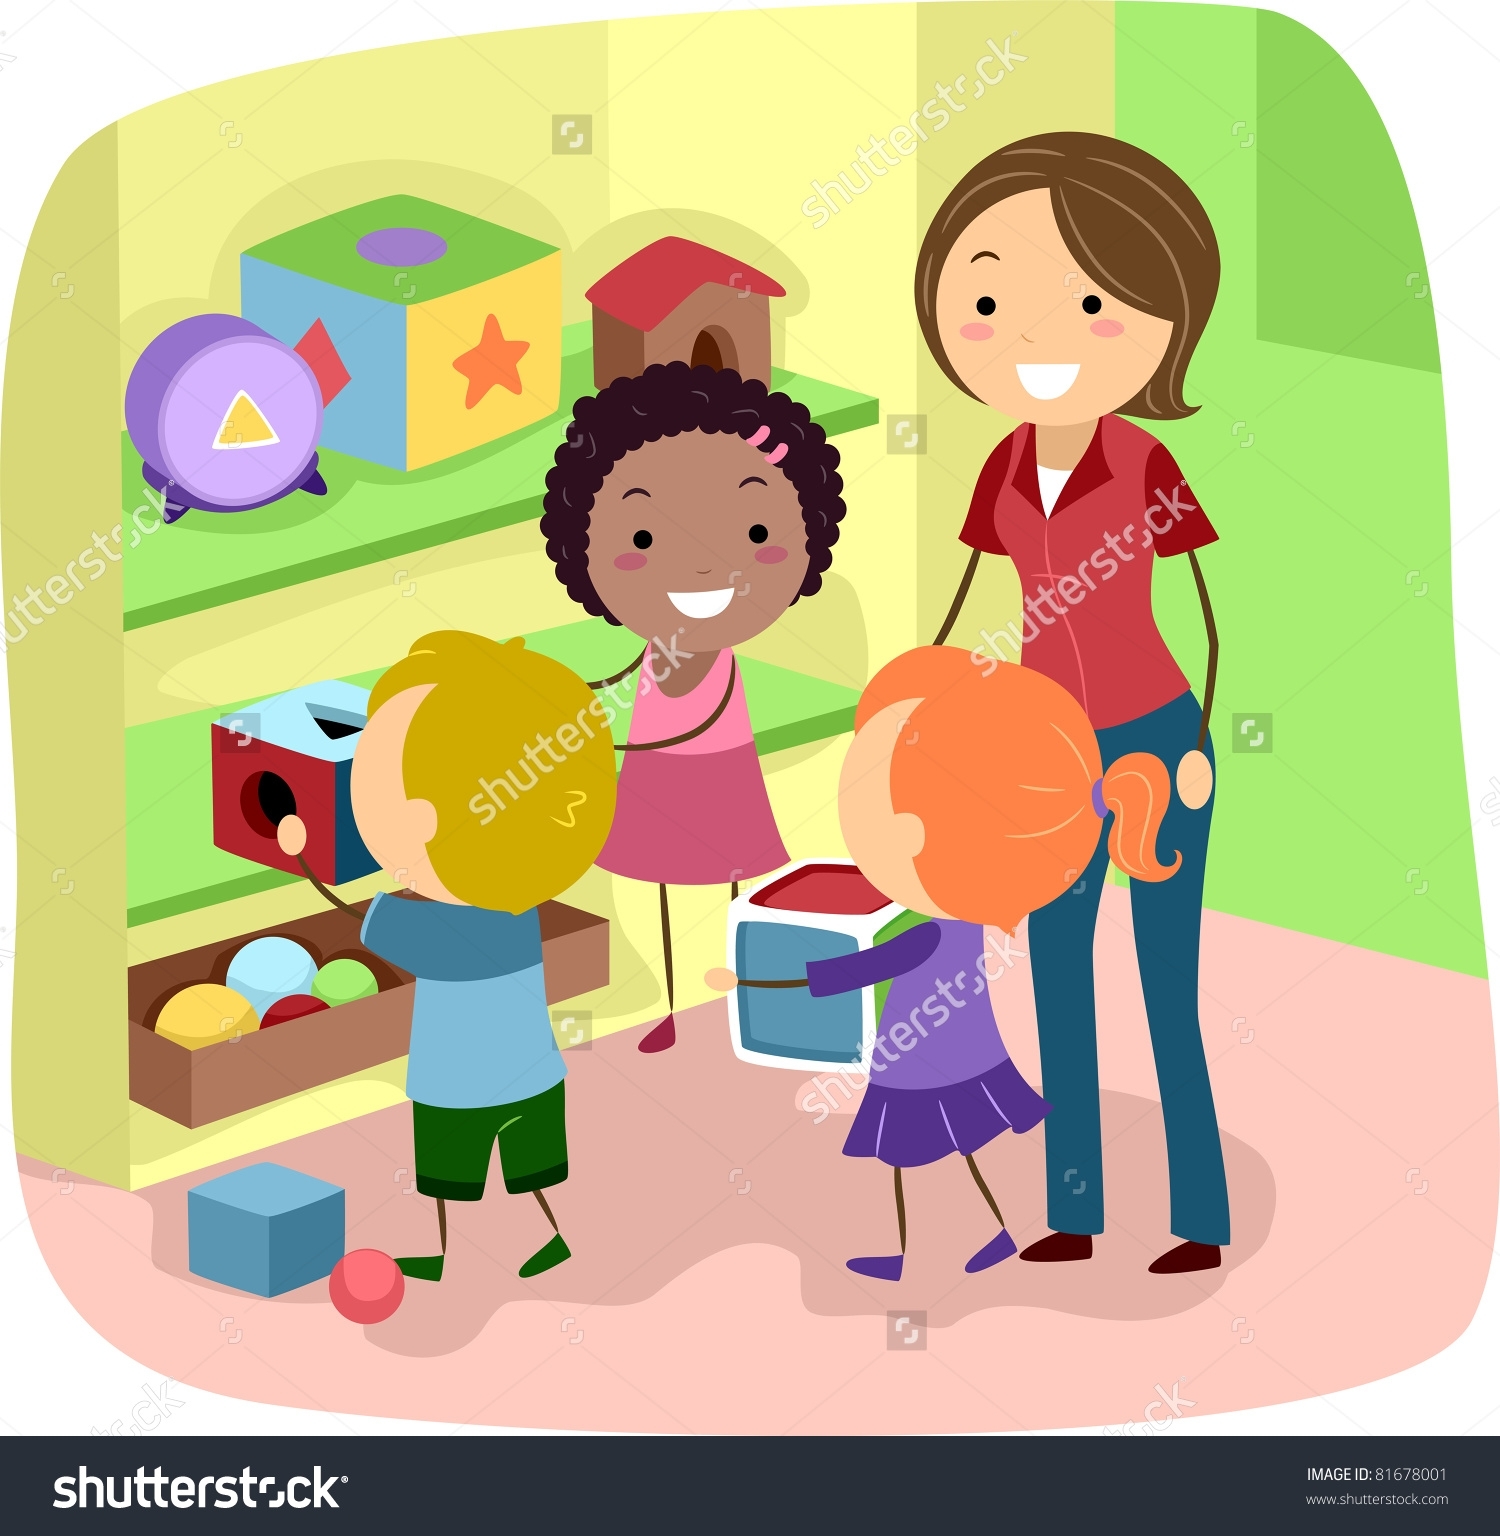 Pick up toys clipart Inspirational Toy clipart cleanup